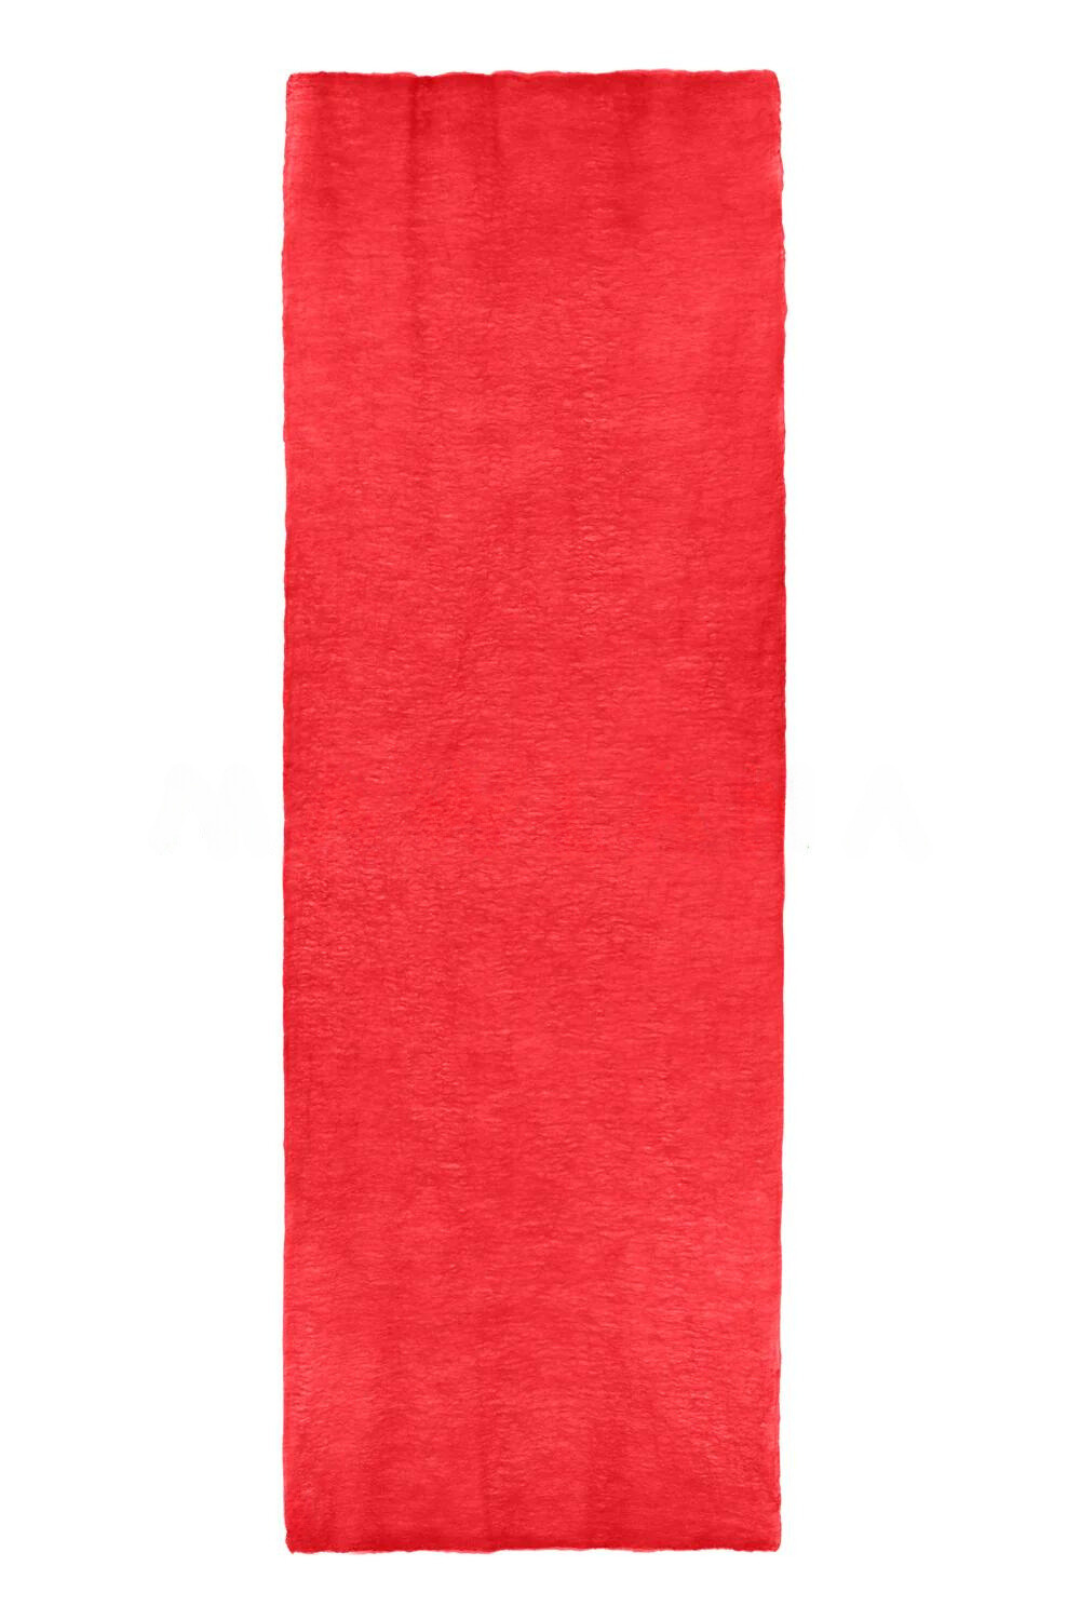 Simply Sparge Micro Baby Cashmere Stole - Red